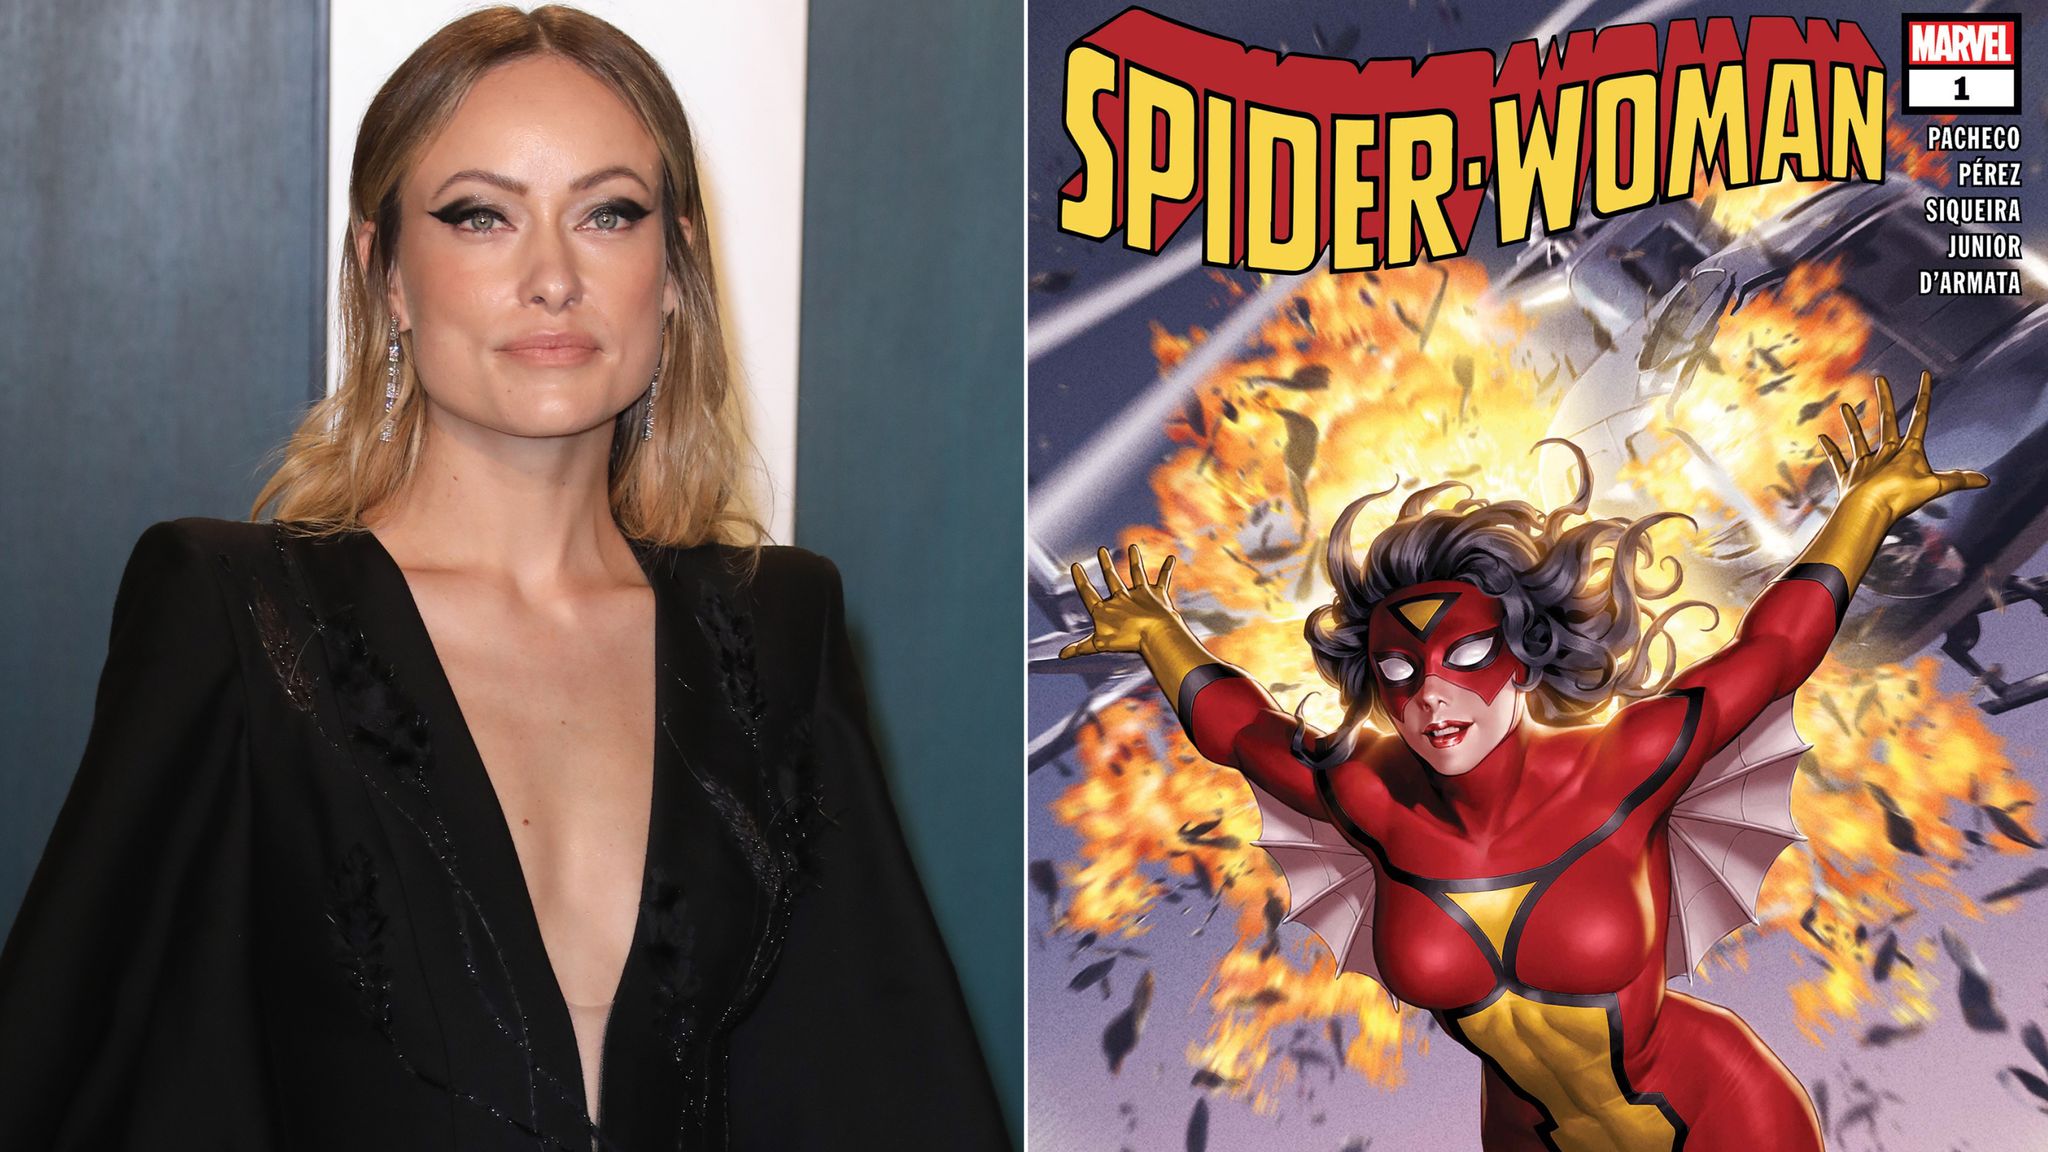 Spider-Woman teased as Olivia Wilde confirmed to direct female-fronted Marvel film | Ents & Arts News | Sky News